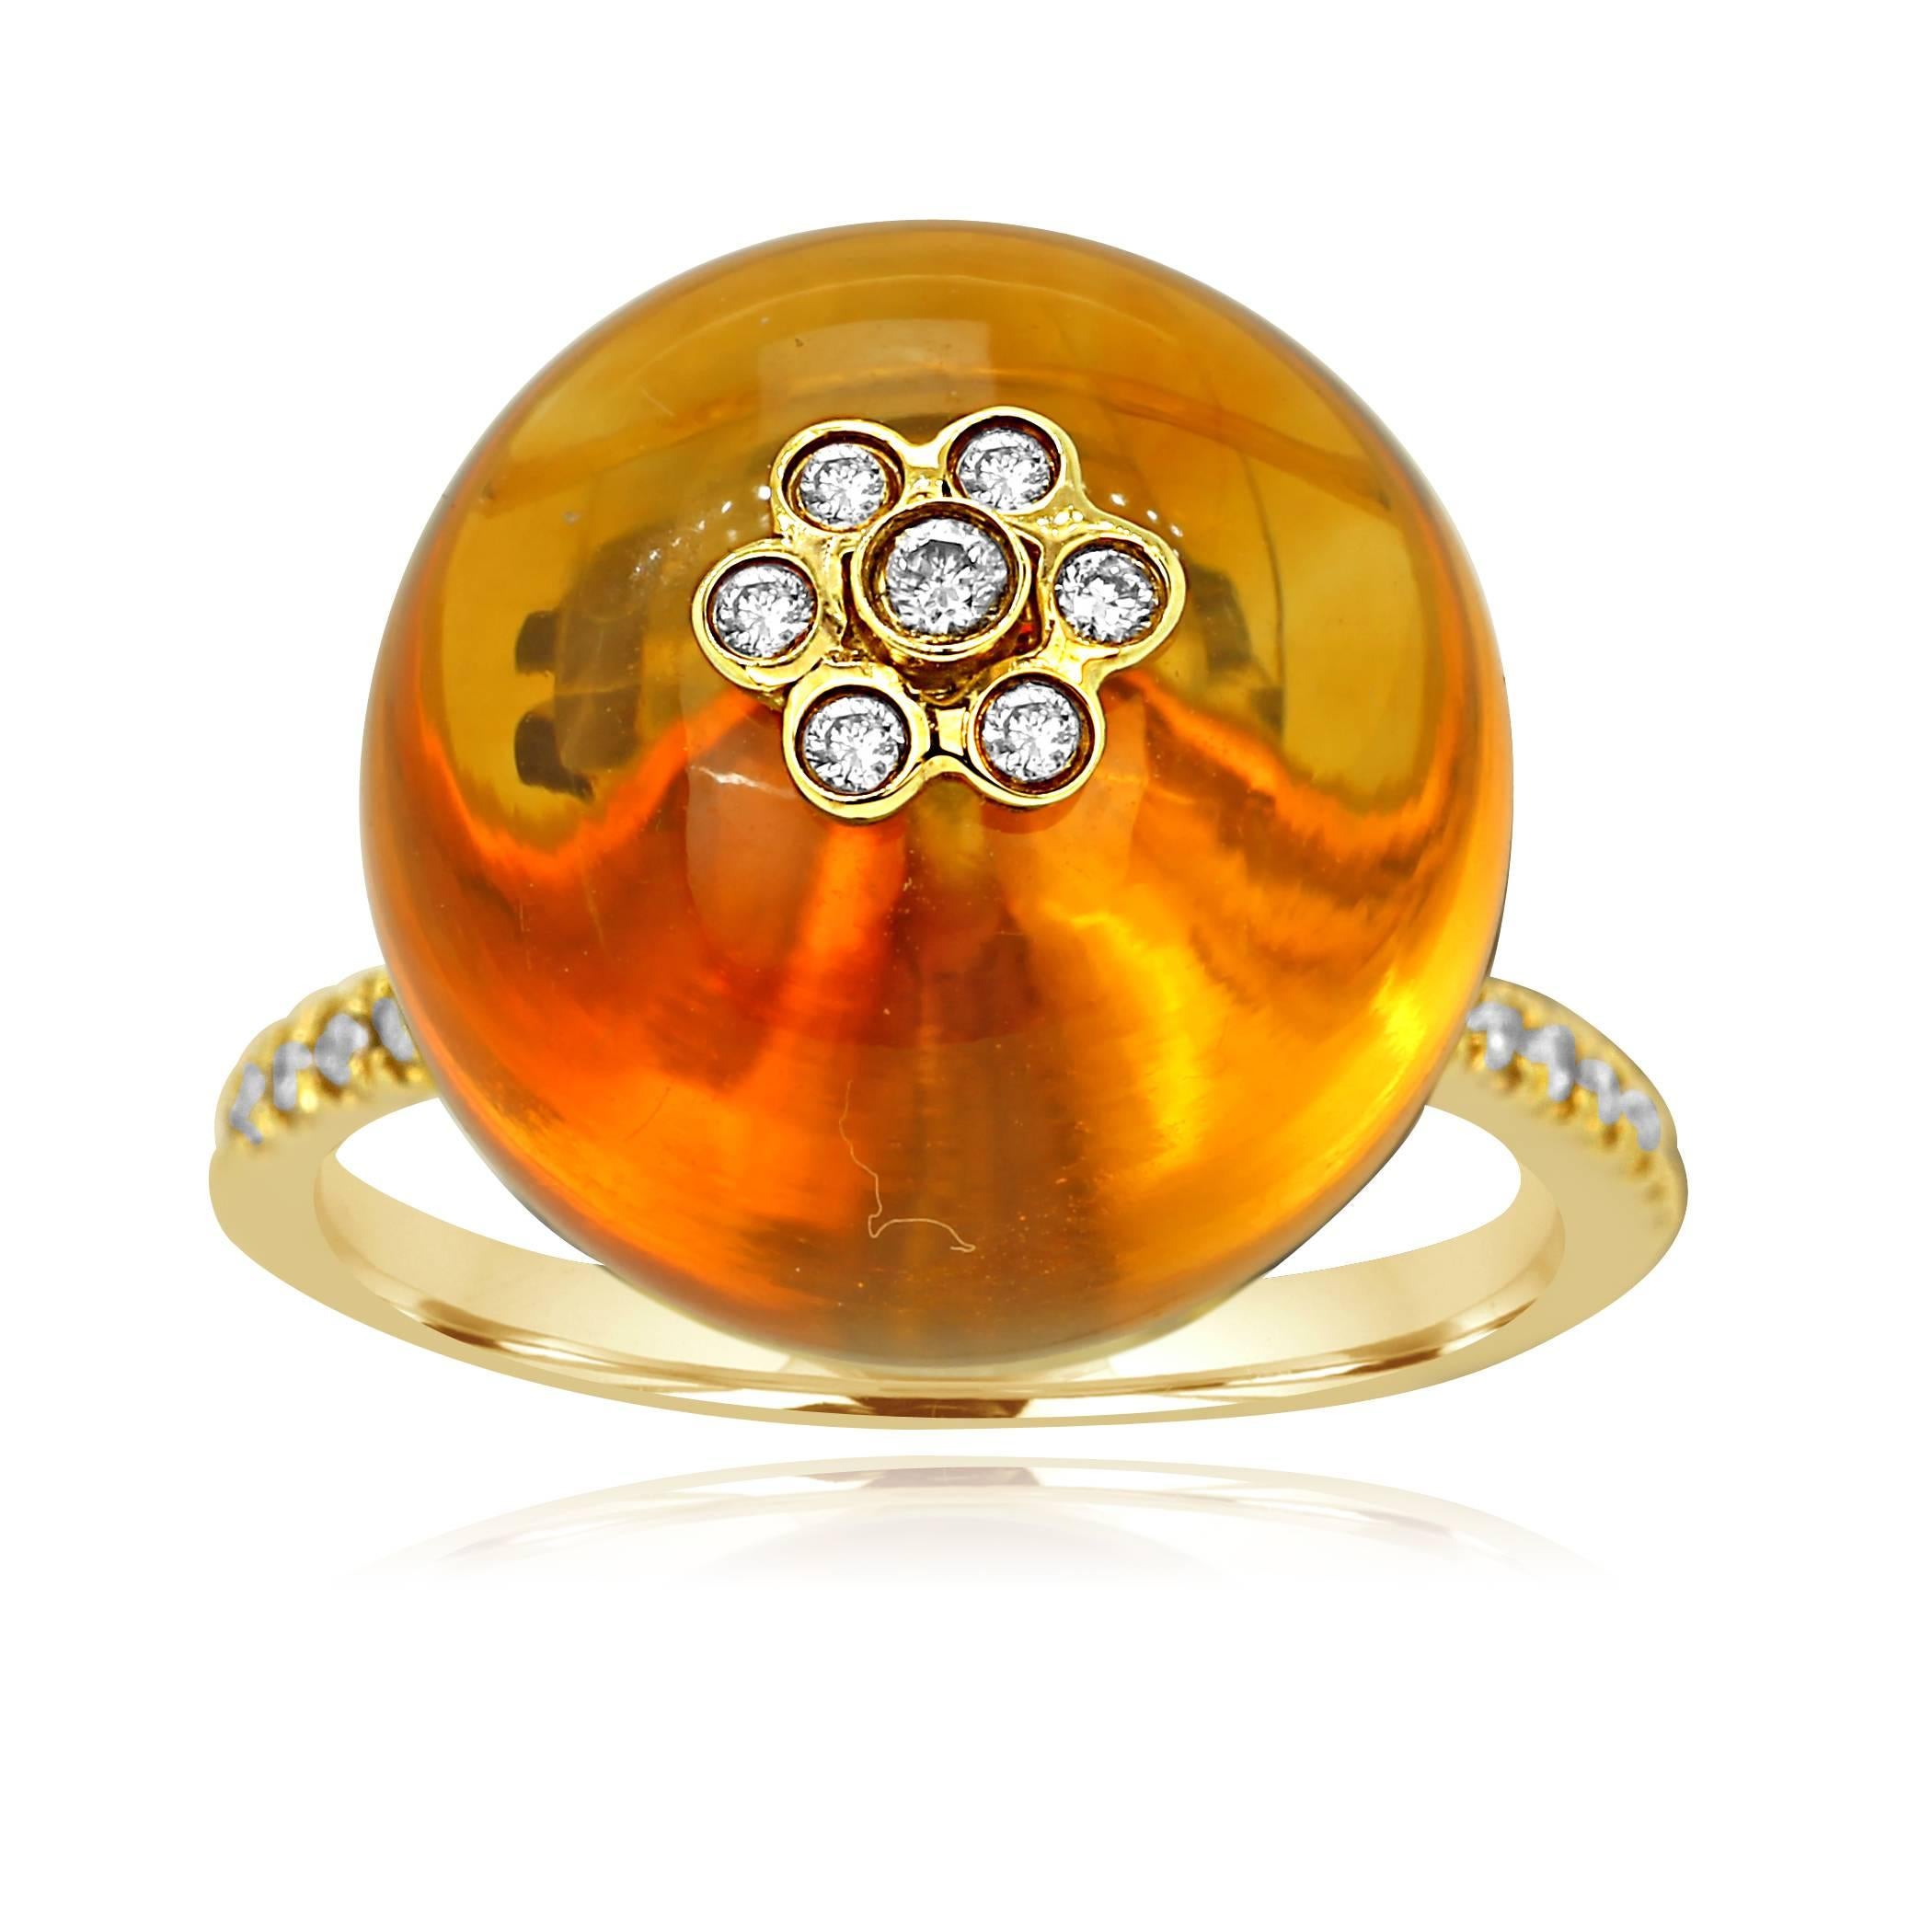 Stunning 21.04 Carat Ball Shaped Citrine with 0.20 Carat of White VS Quality round Diamonds on 14K Yellow Gold Stylish Fashion Cocktail Ring.

Total Stones Weight 21.24 Carat